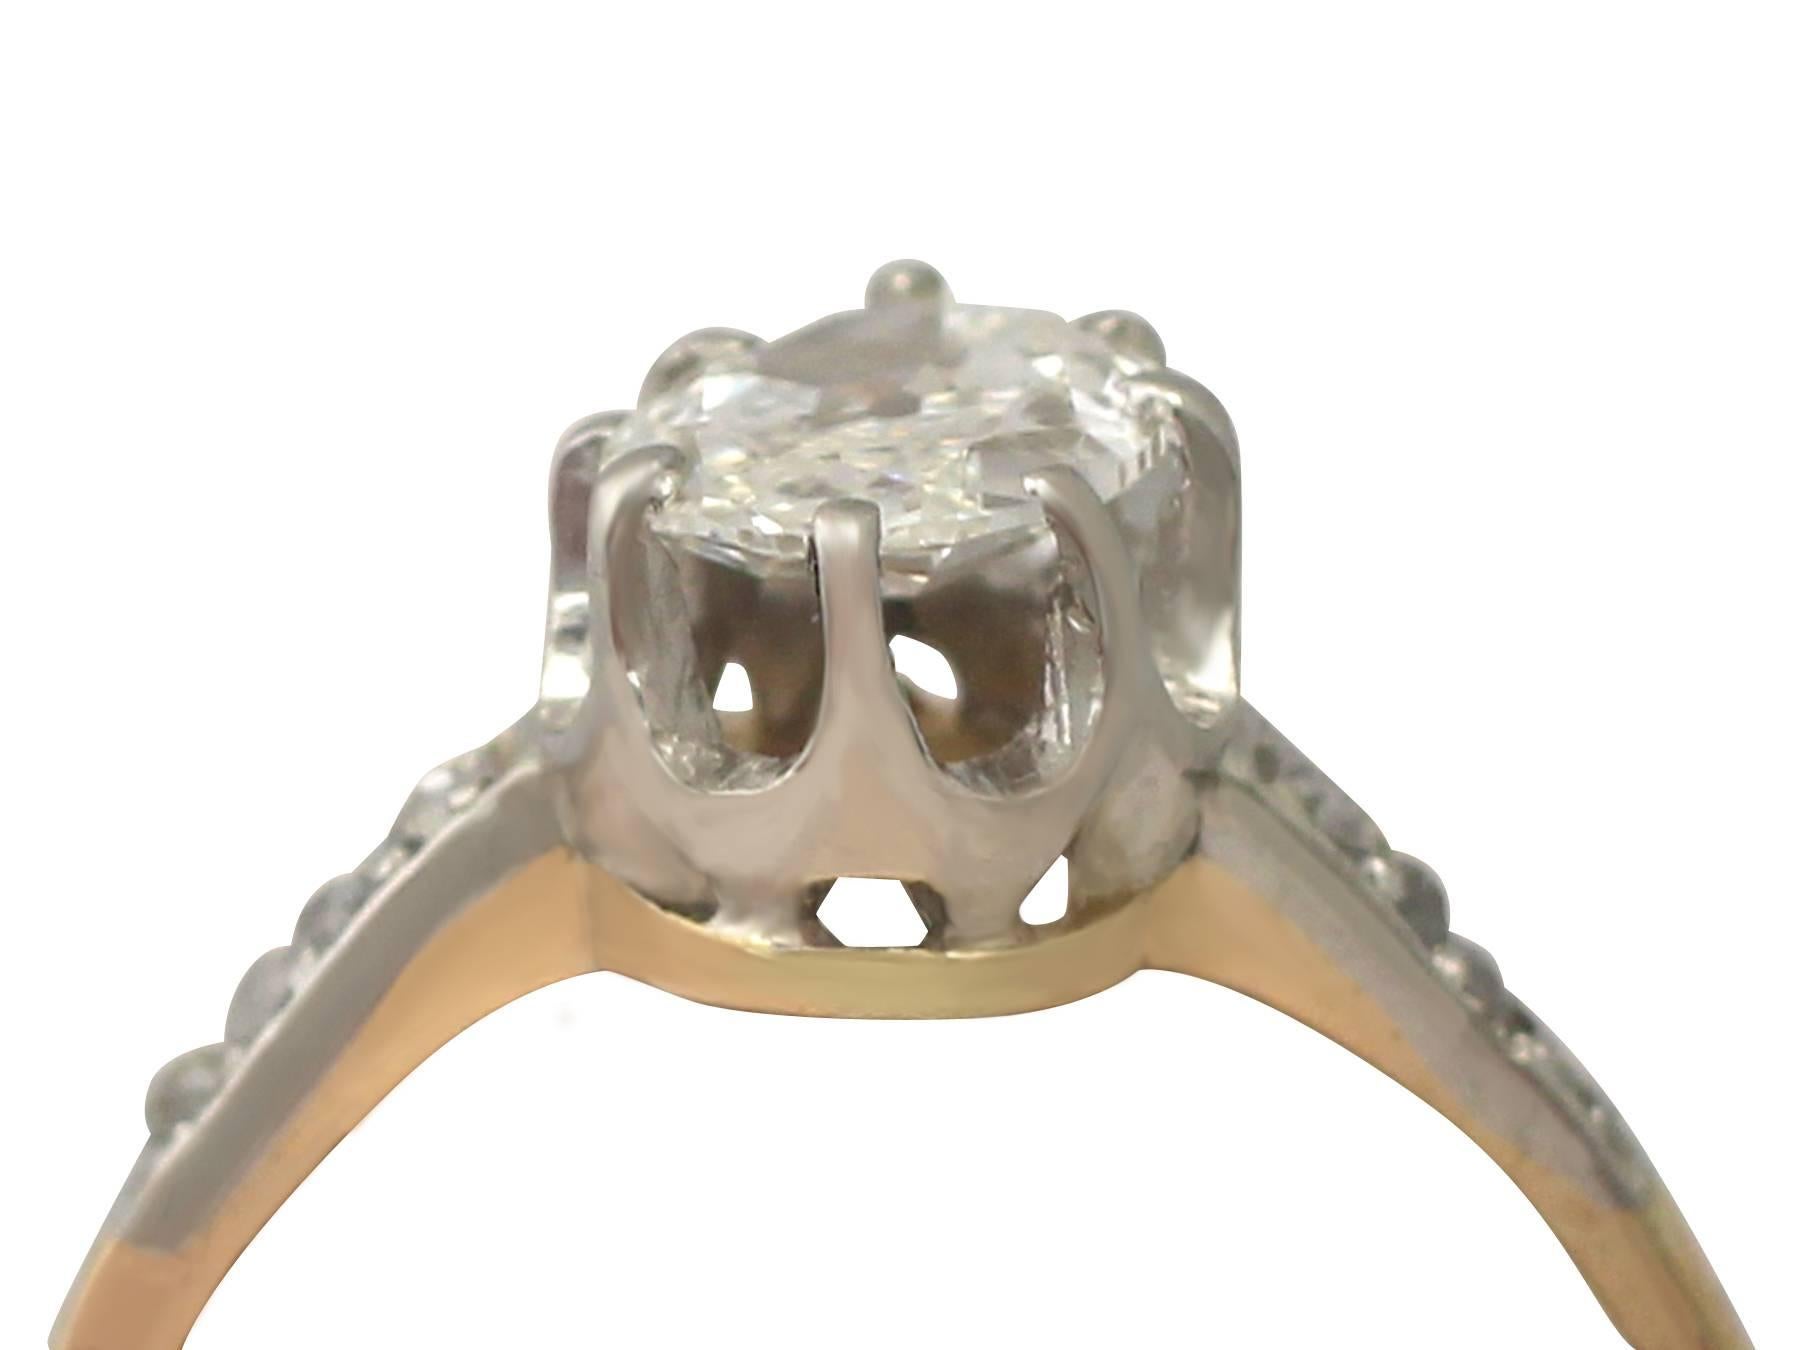  fine and impressive antique French 0.91 carat diamond (total) and 18 karat yellow gold, platinum set solitaire ring; part of our diverse antique jewelry and estate jewelry collections.

This fine and impressive diamond solitaire ring has been